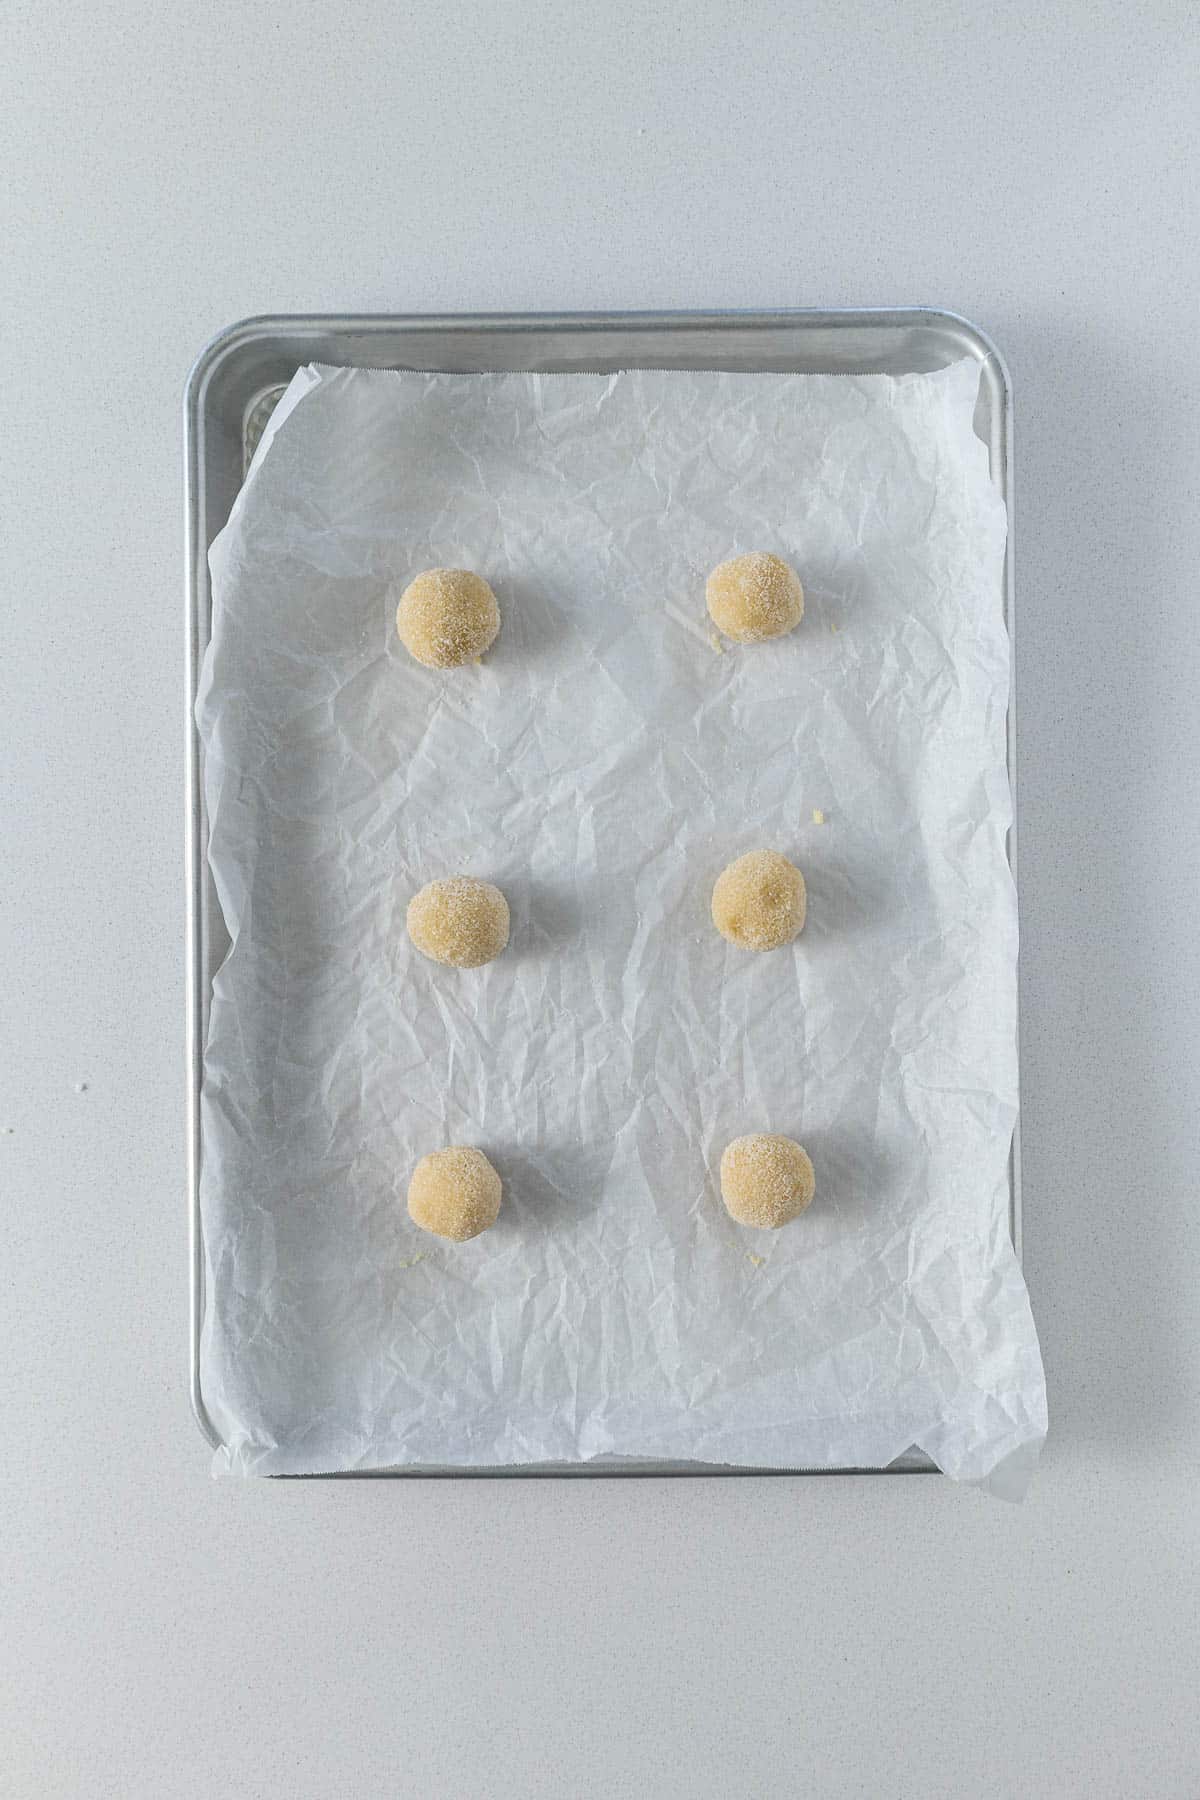 Step 6 - Cookie dough rolled in sugar and placed on a baking sheet ready for baking.